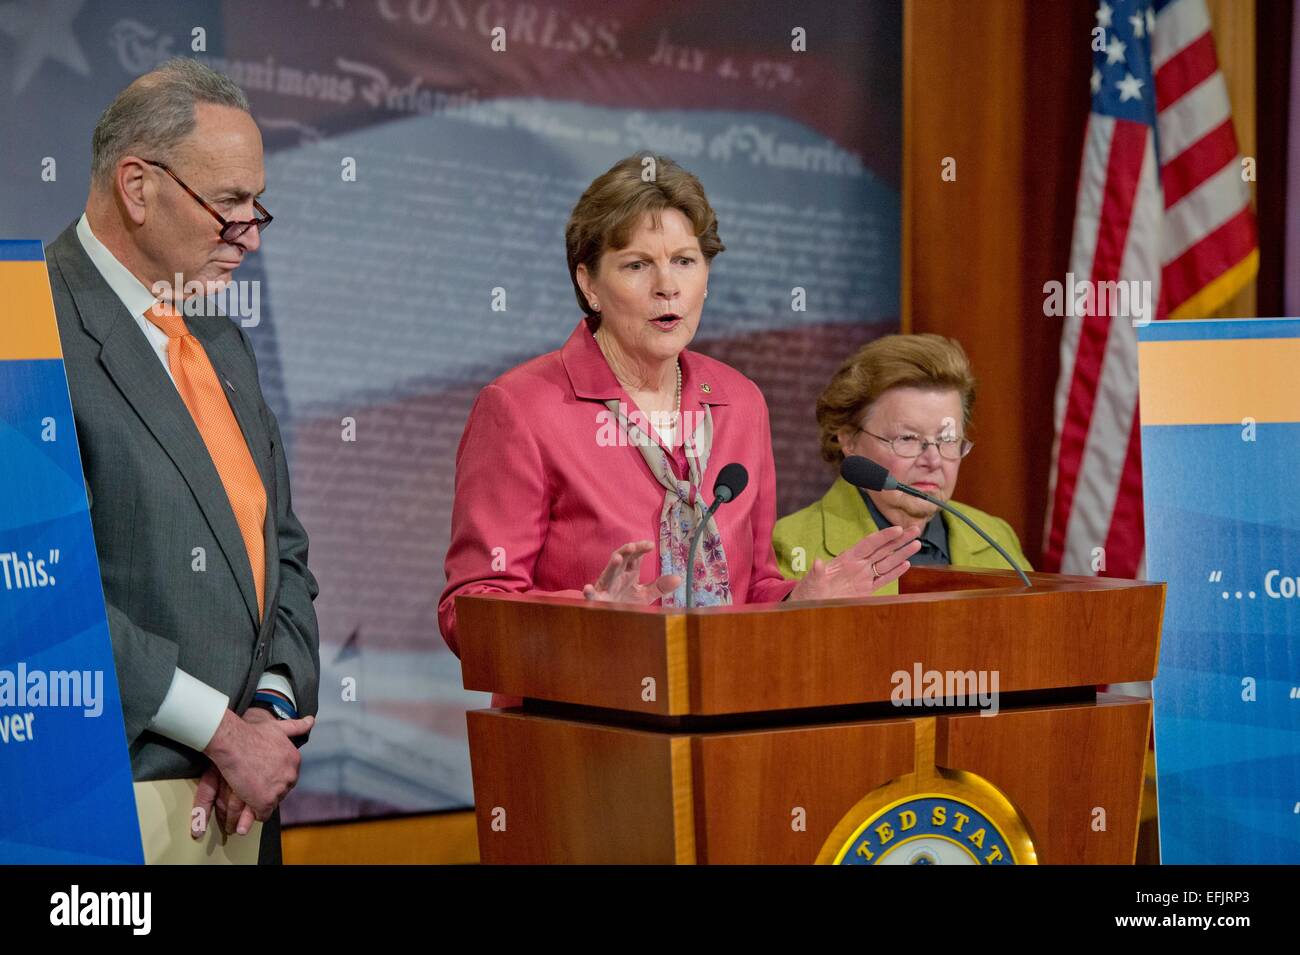 US Democratic Senator Jeanne Shaheen along with Senators Chuck Schumer and Barbara Mikulski during a press briefing following the defeat of a third DHS funding bill by Republicans February 5, 2015 in Washington, DC. Stock Photo